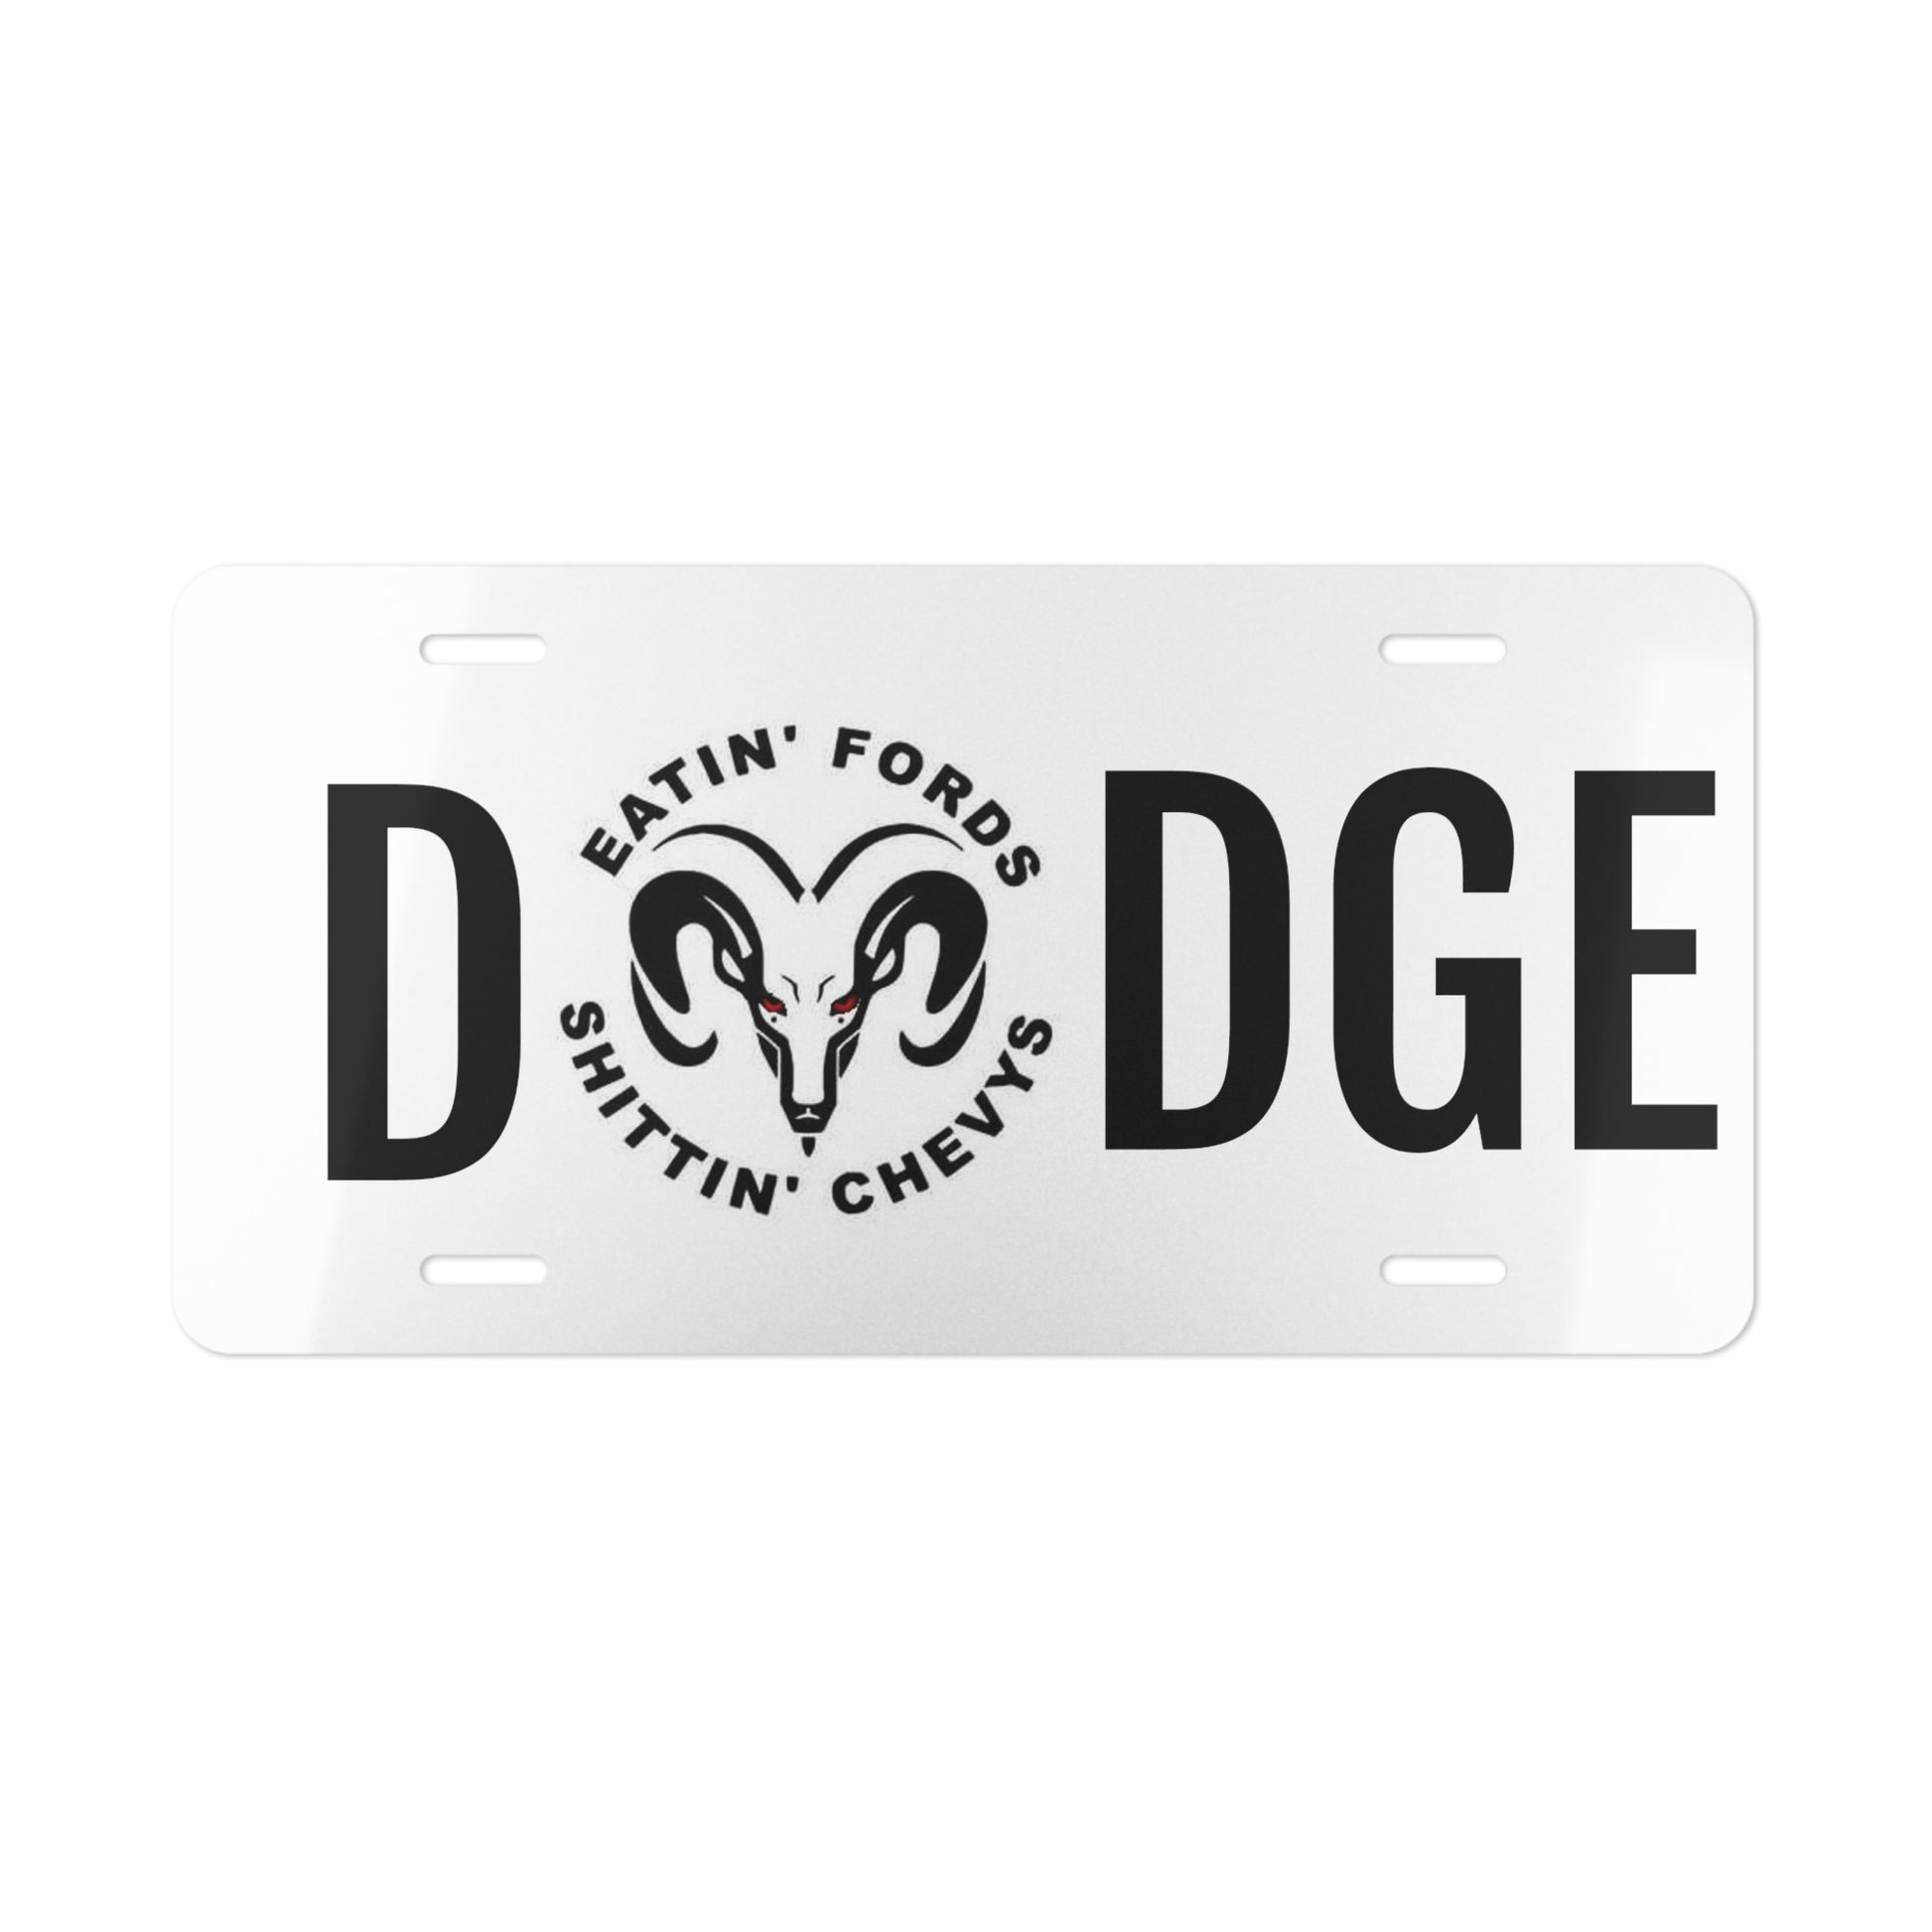 Dodge Eats Ford S-its Chevys Vanity License Plate